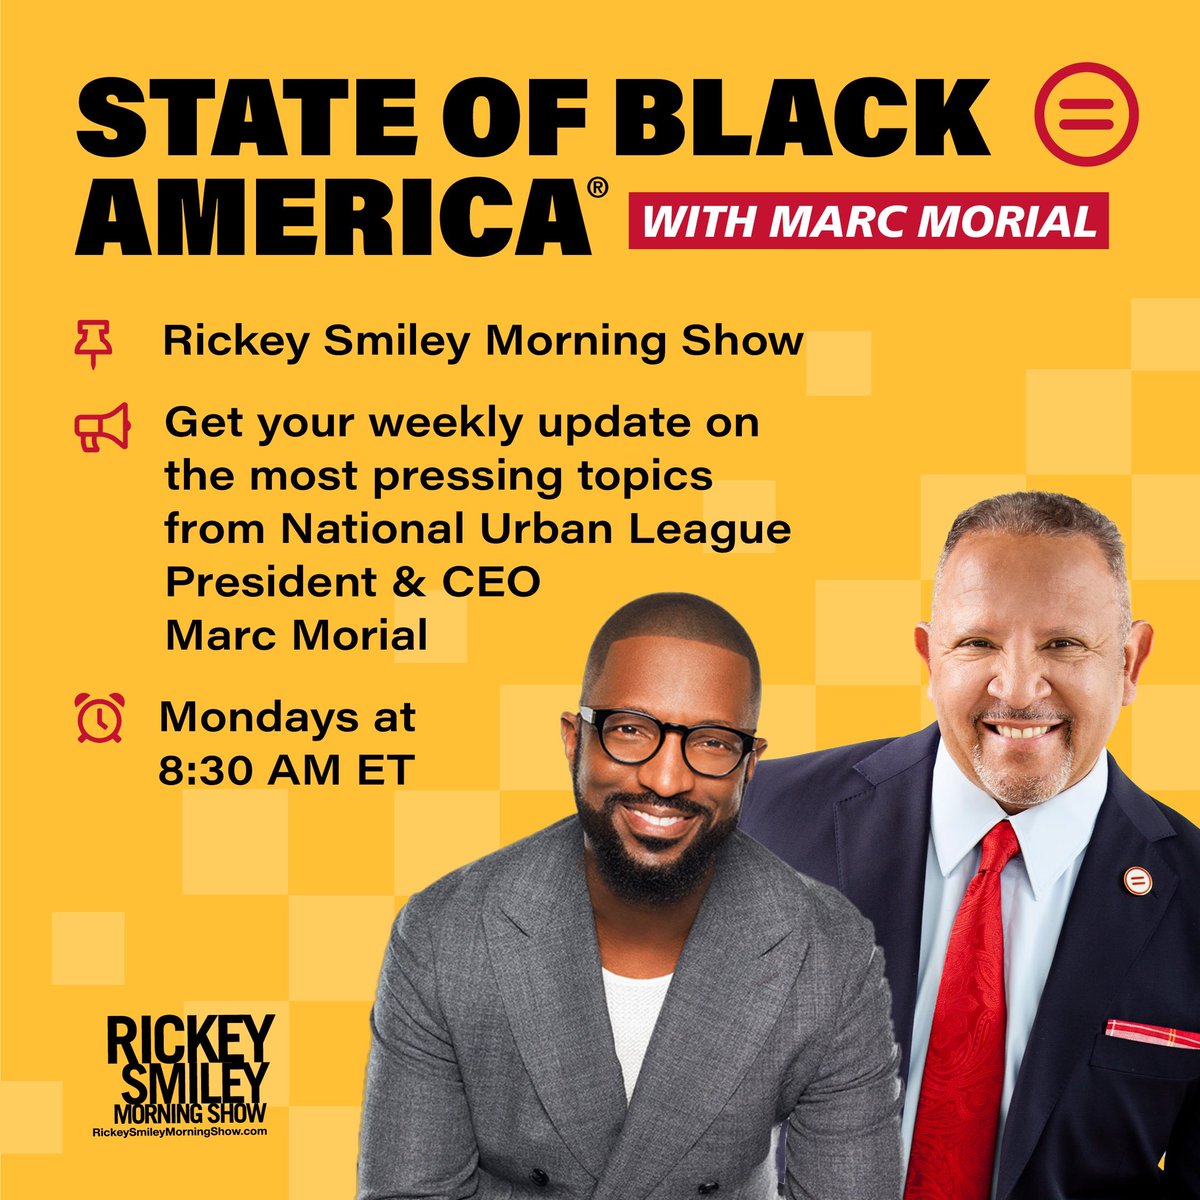 Kick the first Monday of the month off with @MarcMorial’s State of Black America segment on @TheRSMS at 8:30 AM ET. 🎧 Find your local station: rickeysmileymorningshow.com/affiliates.